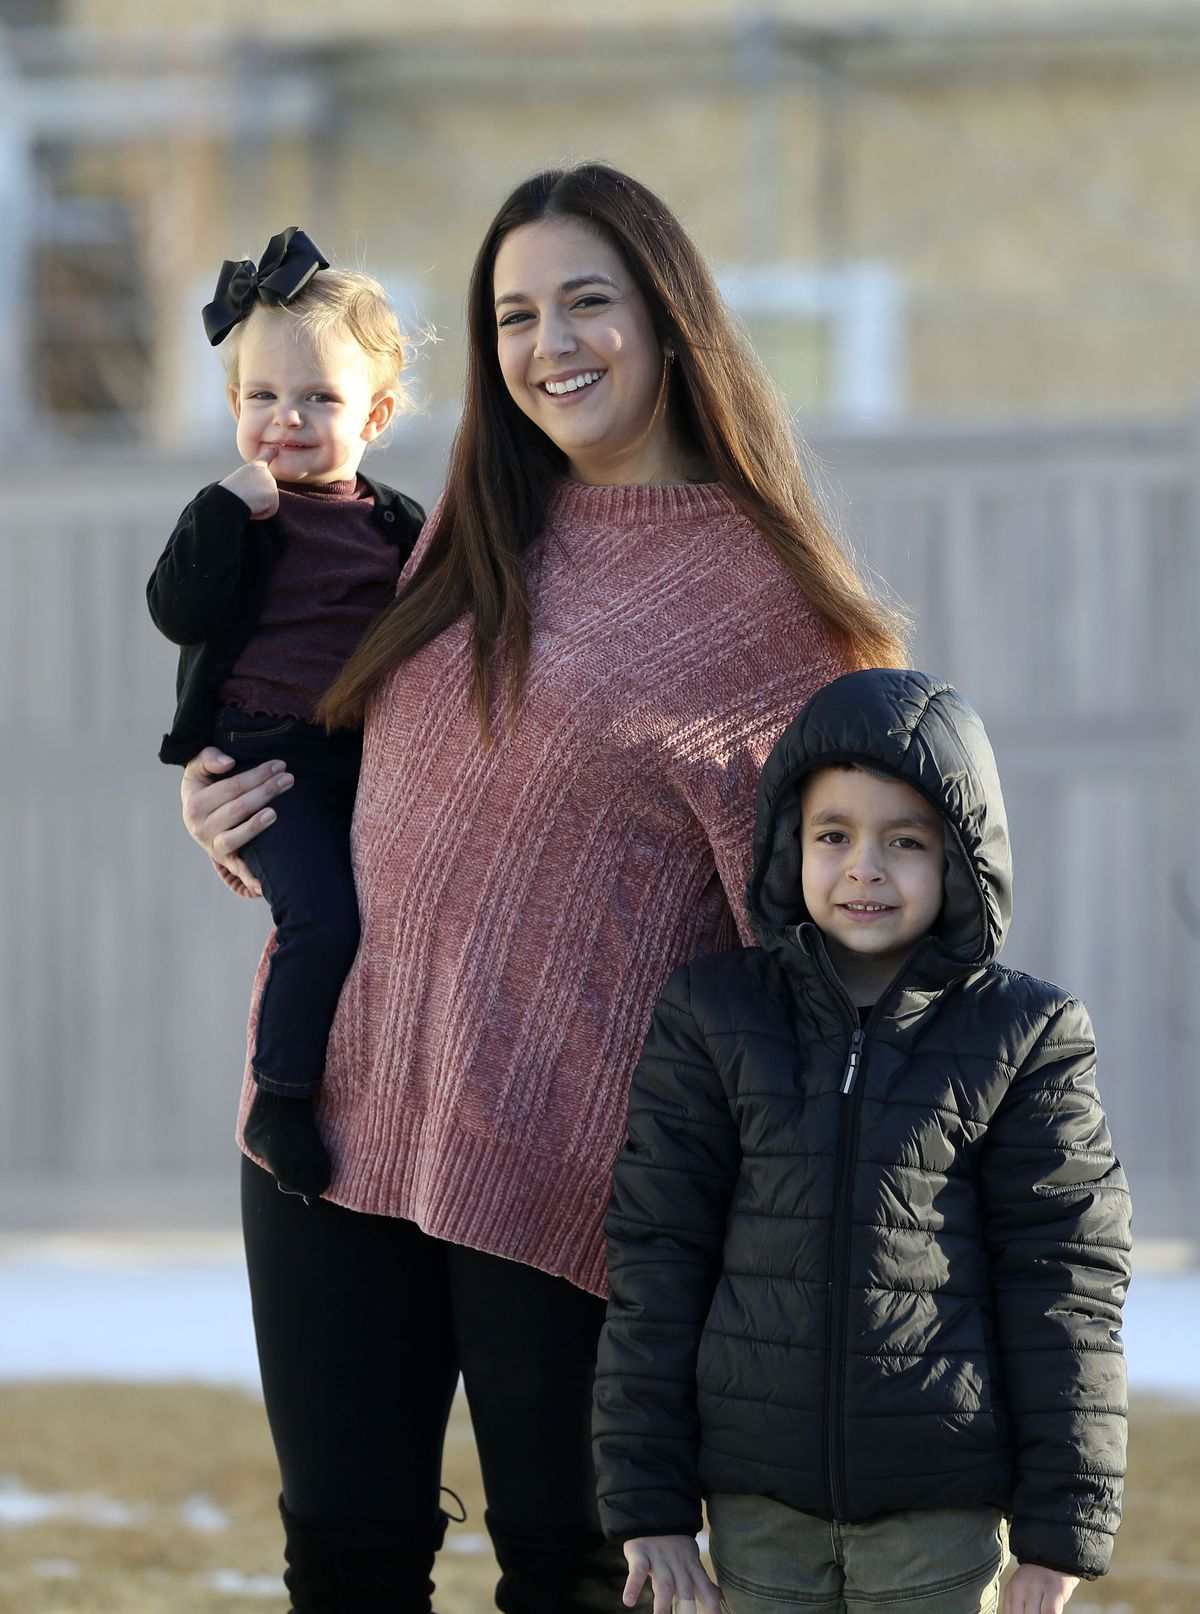 Evi Figgat, center, is photographed with daughter Elinor and son Oliver at their Eagle Mountain home on Wednesday, Feb. 17, 2021.